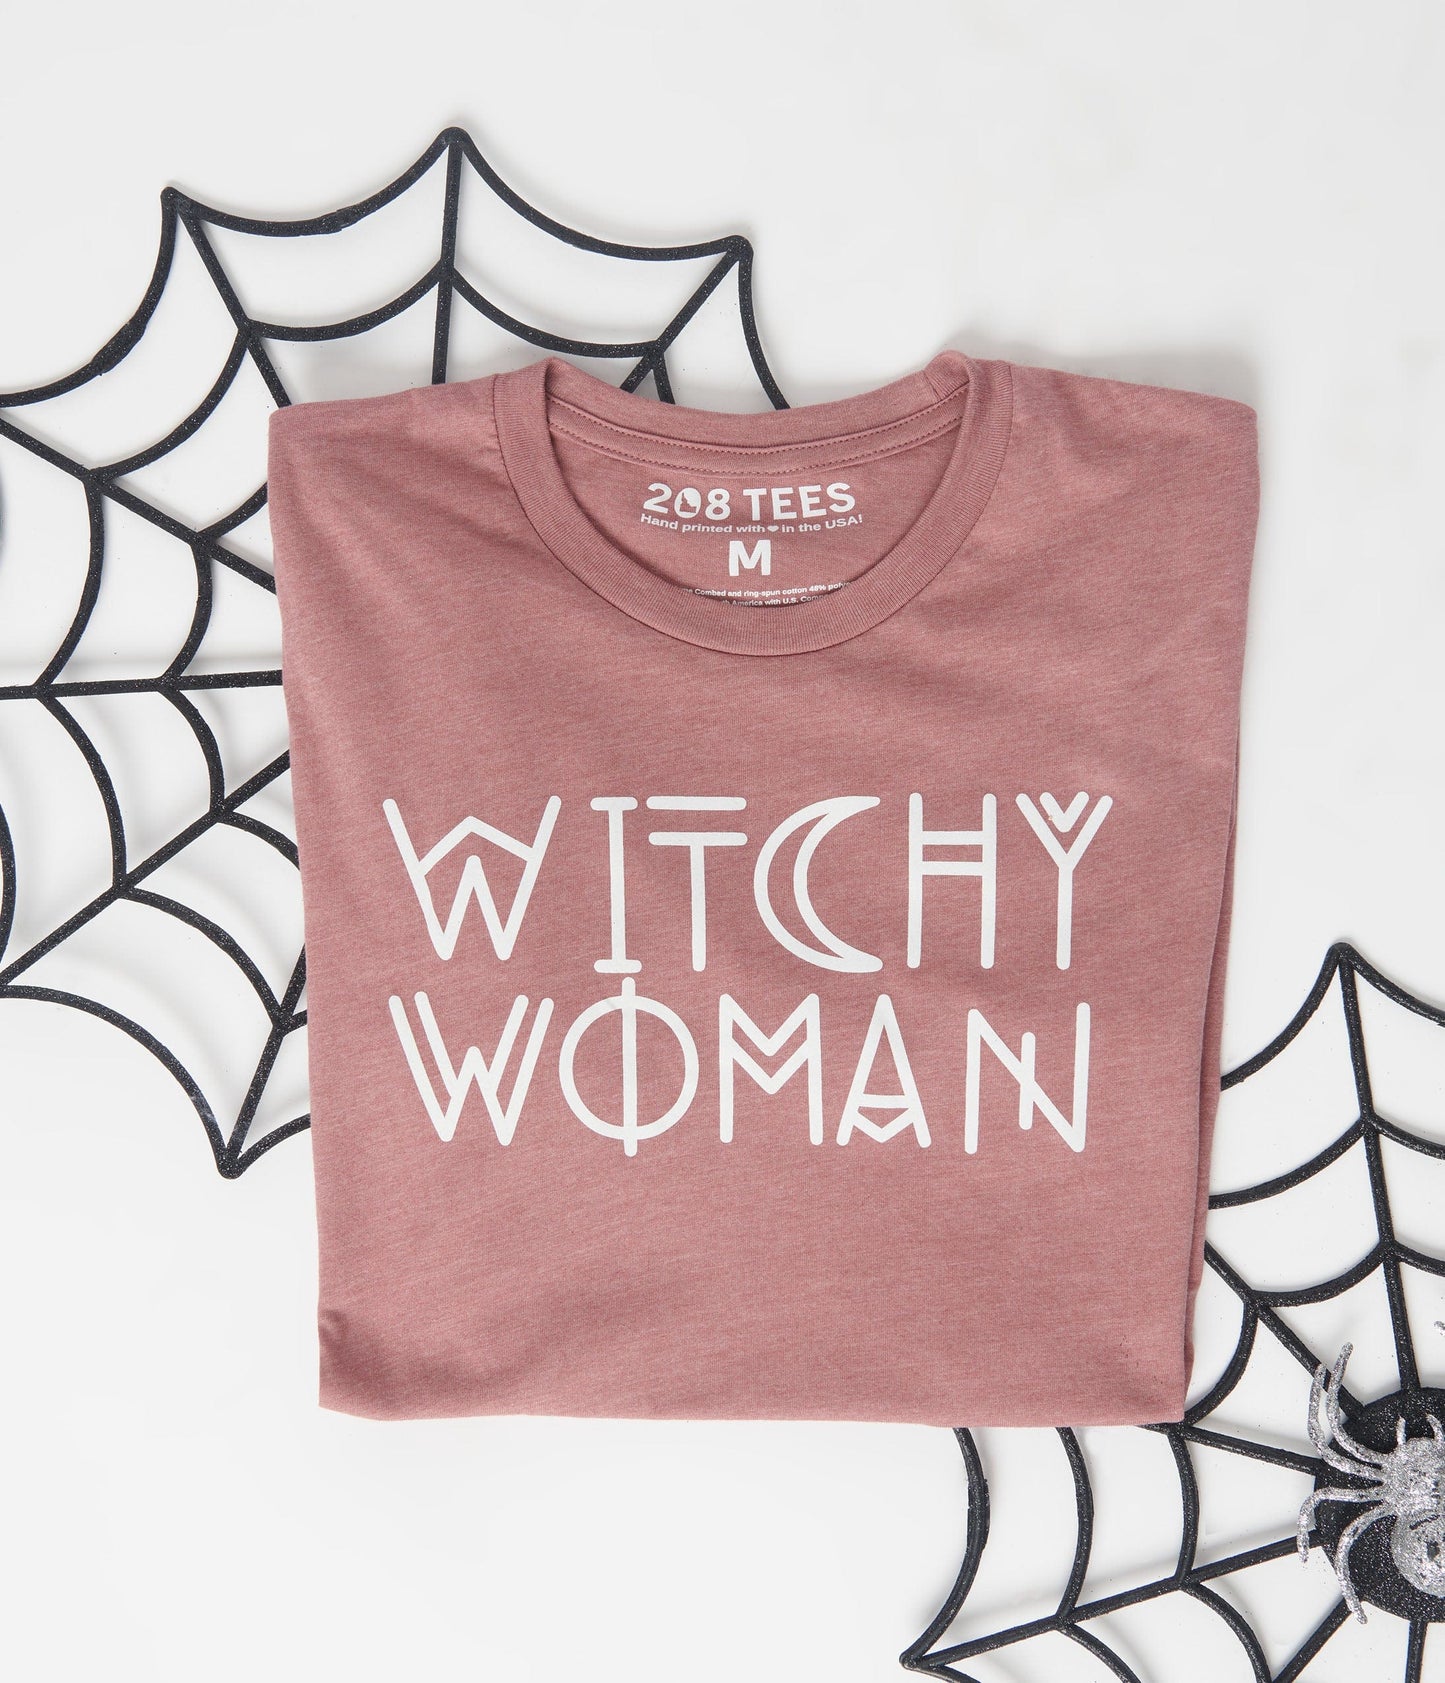 Witchy Woman Unisex Graphic Tee